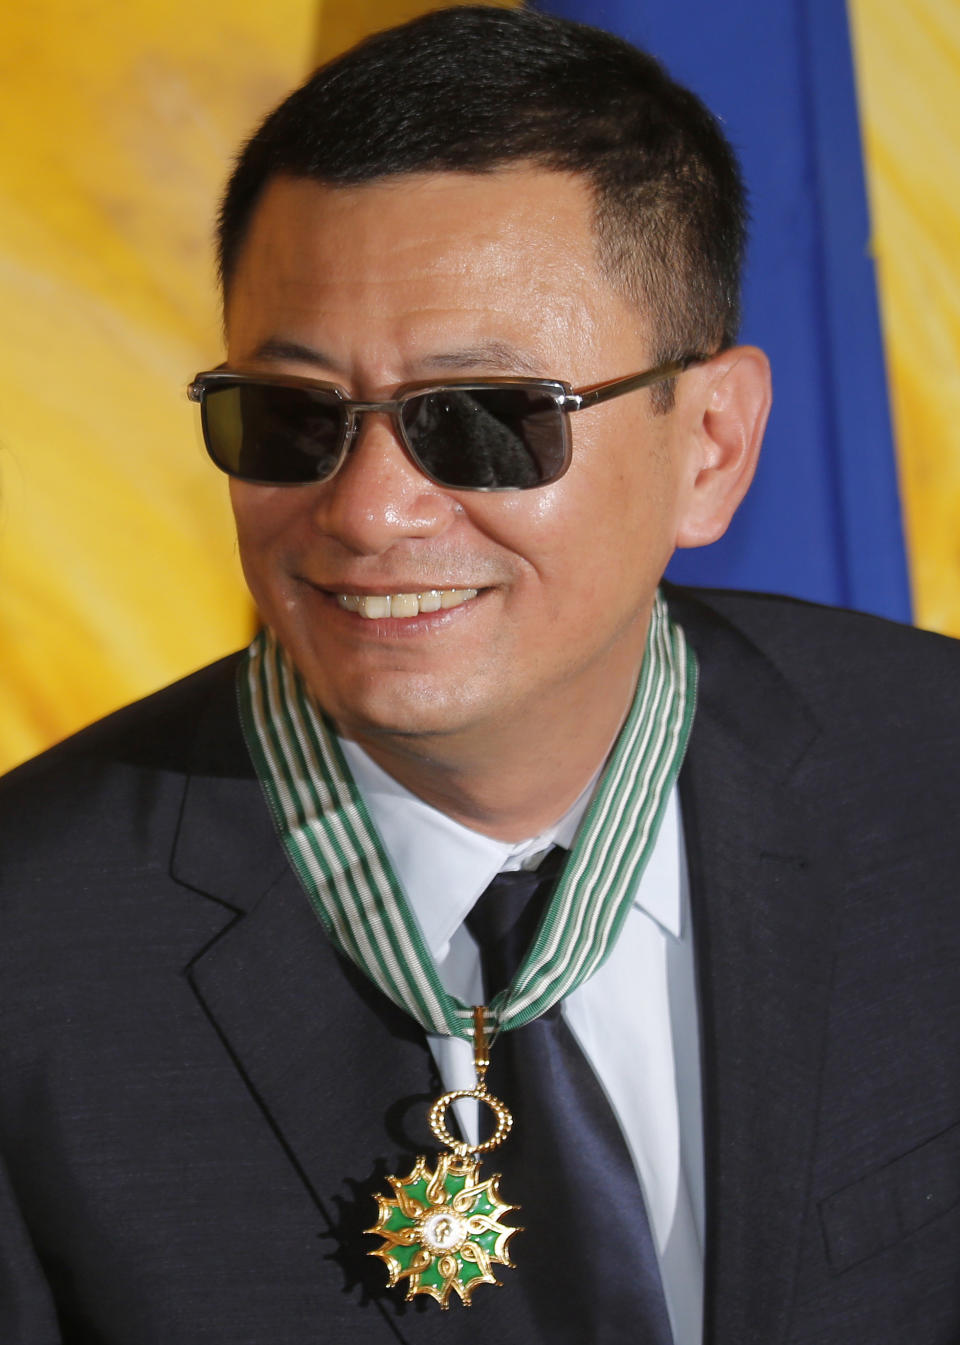 Hong Kong director Wong Kar-wai smiles after he received the Commandeur des Arts et Lettres from French Foreign Minister Laurent Fabius, in Hong Kong Sunday, May 5, 2013. Wong has been given France's highest cultural honor. (AP Photo/Vincent Yu)